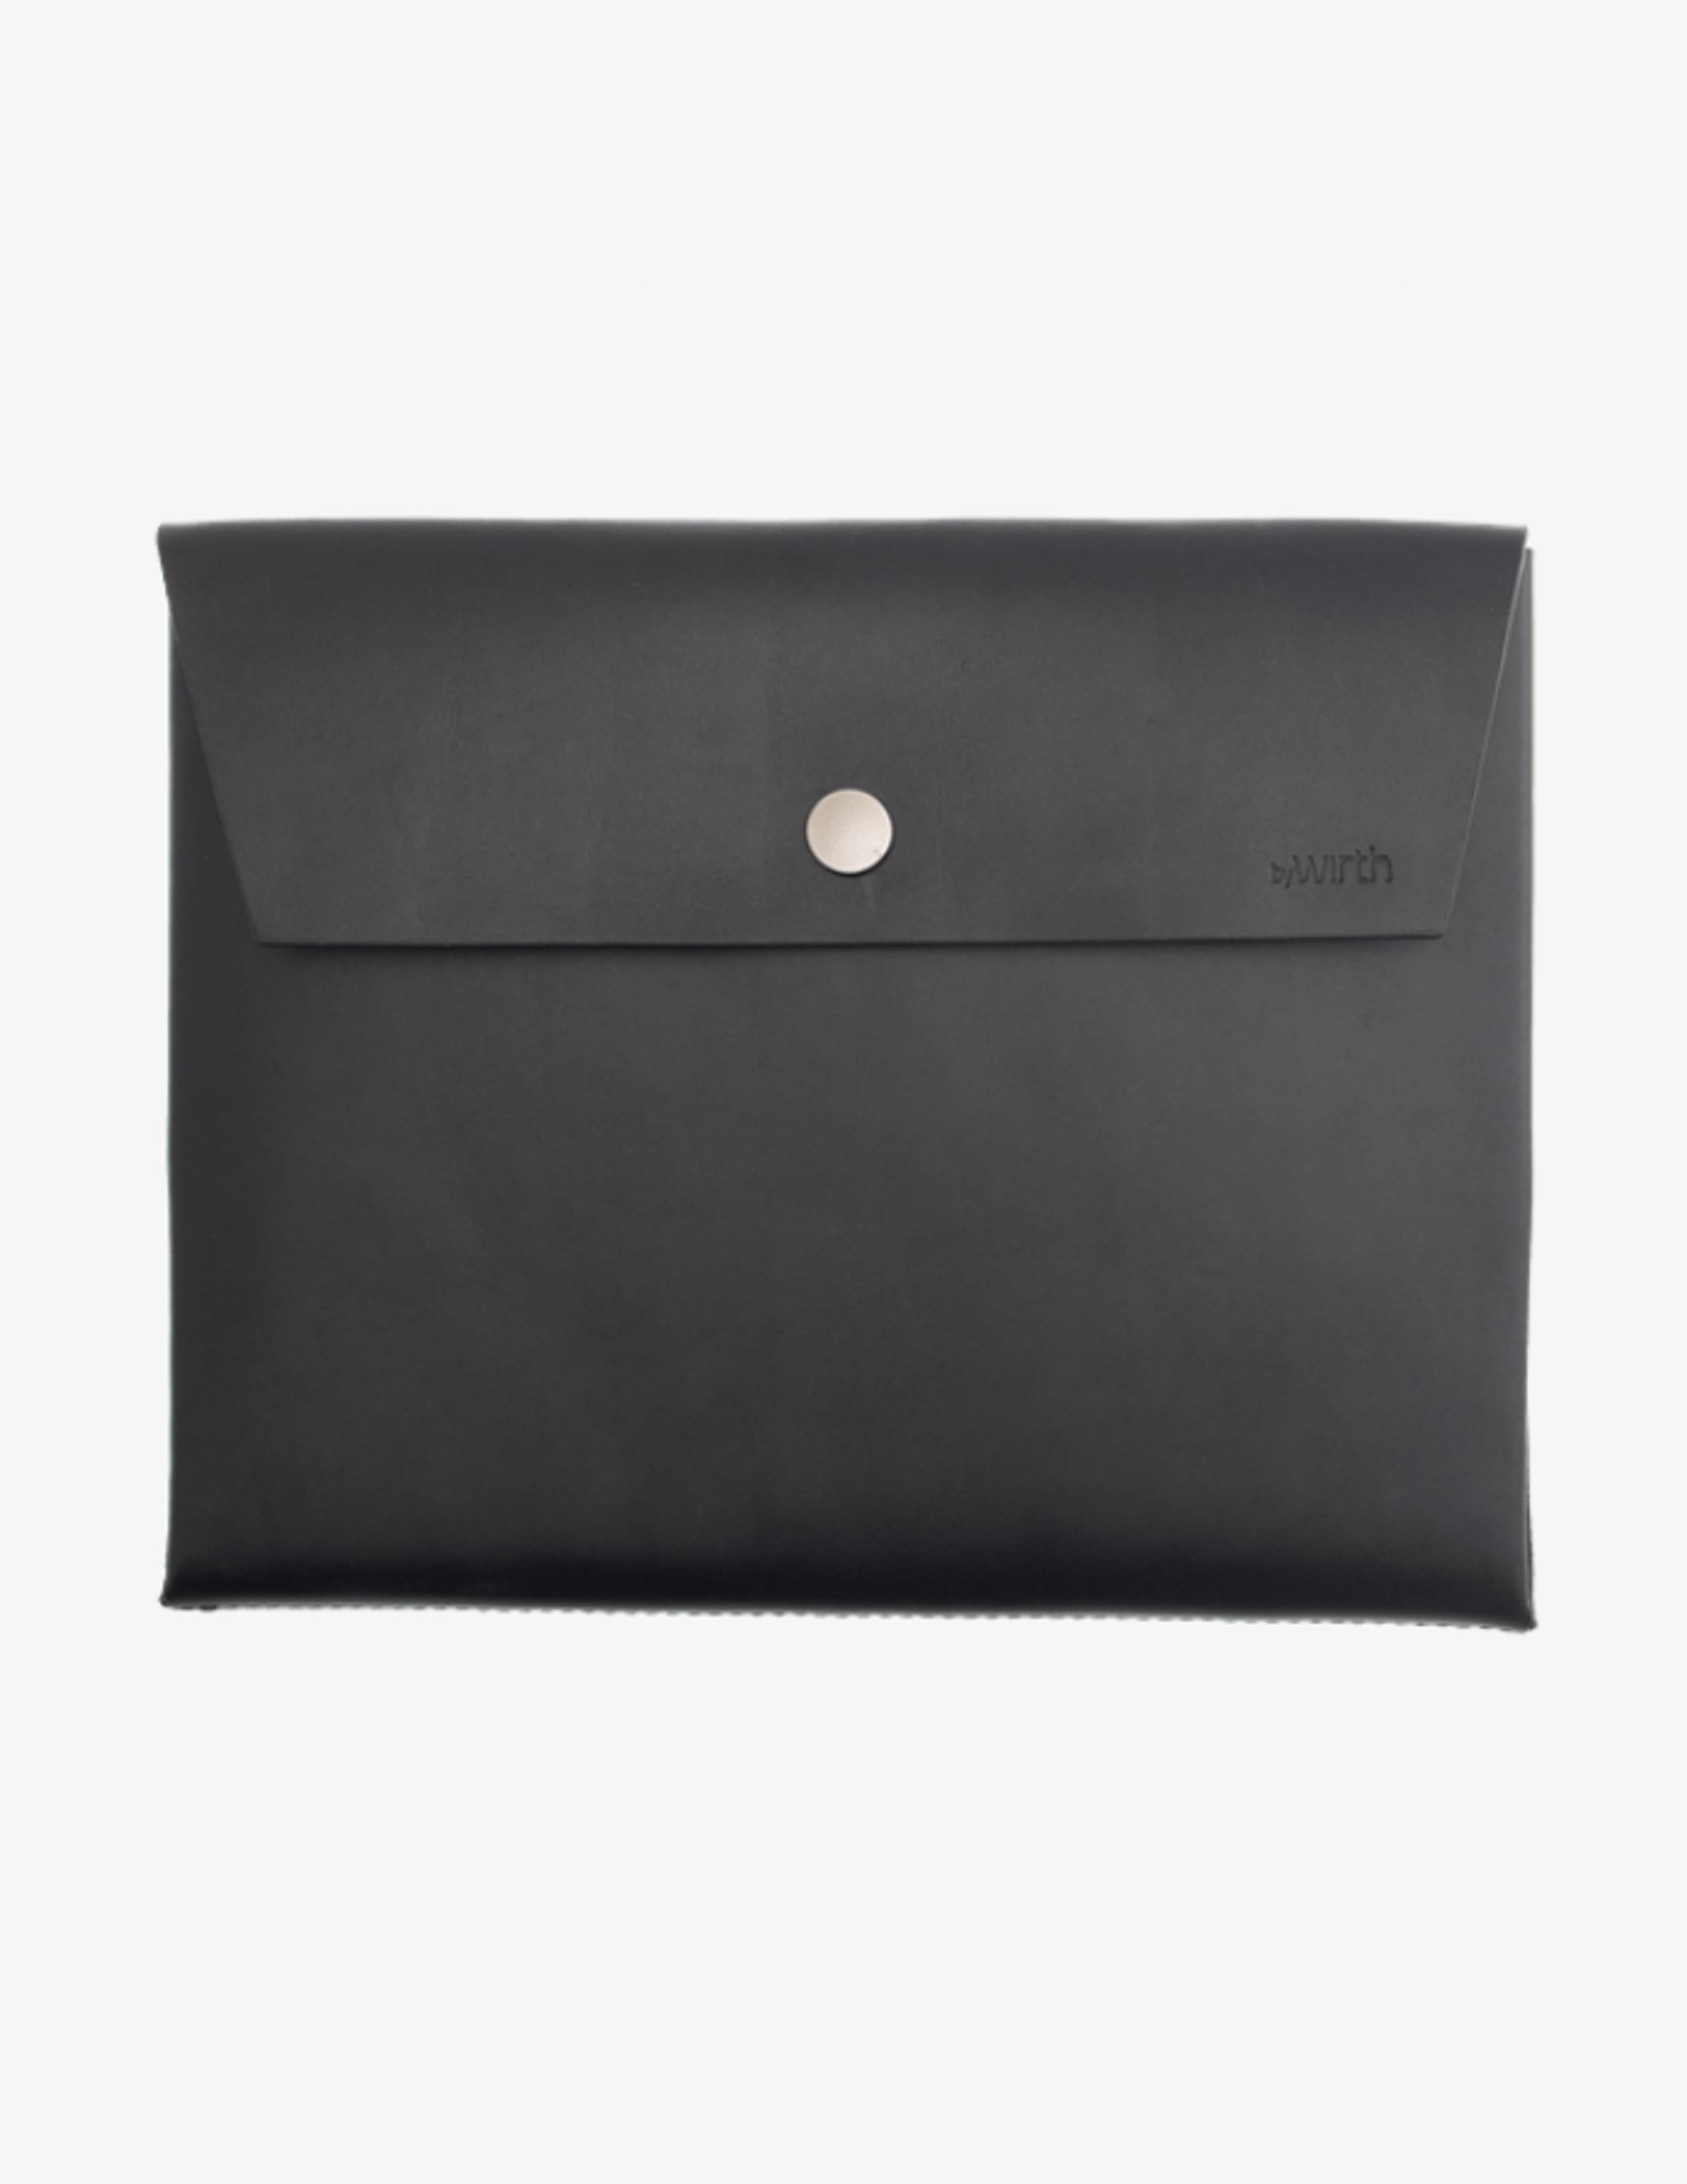 By Wirth - iPad Cover - Carry My Ipad - Black